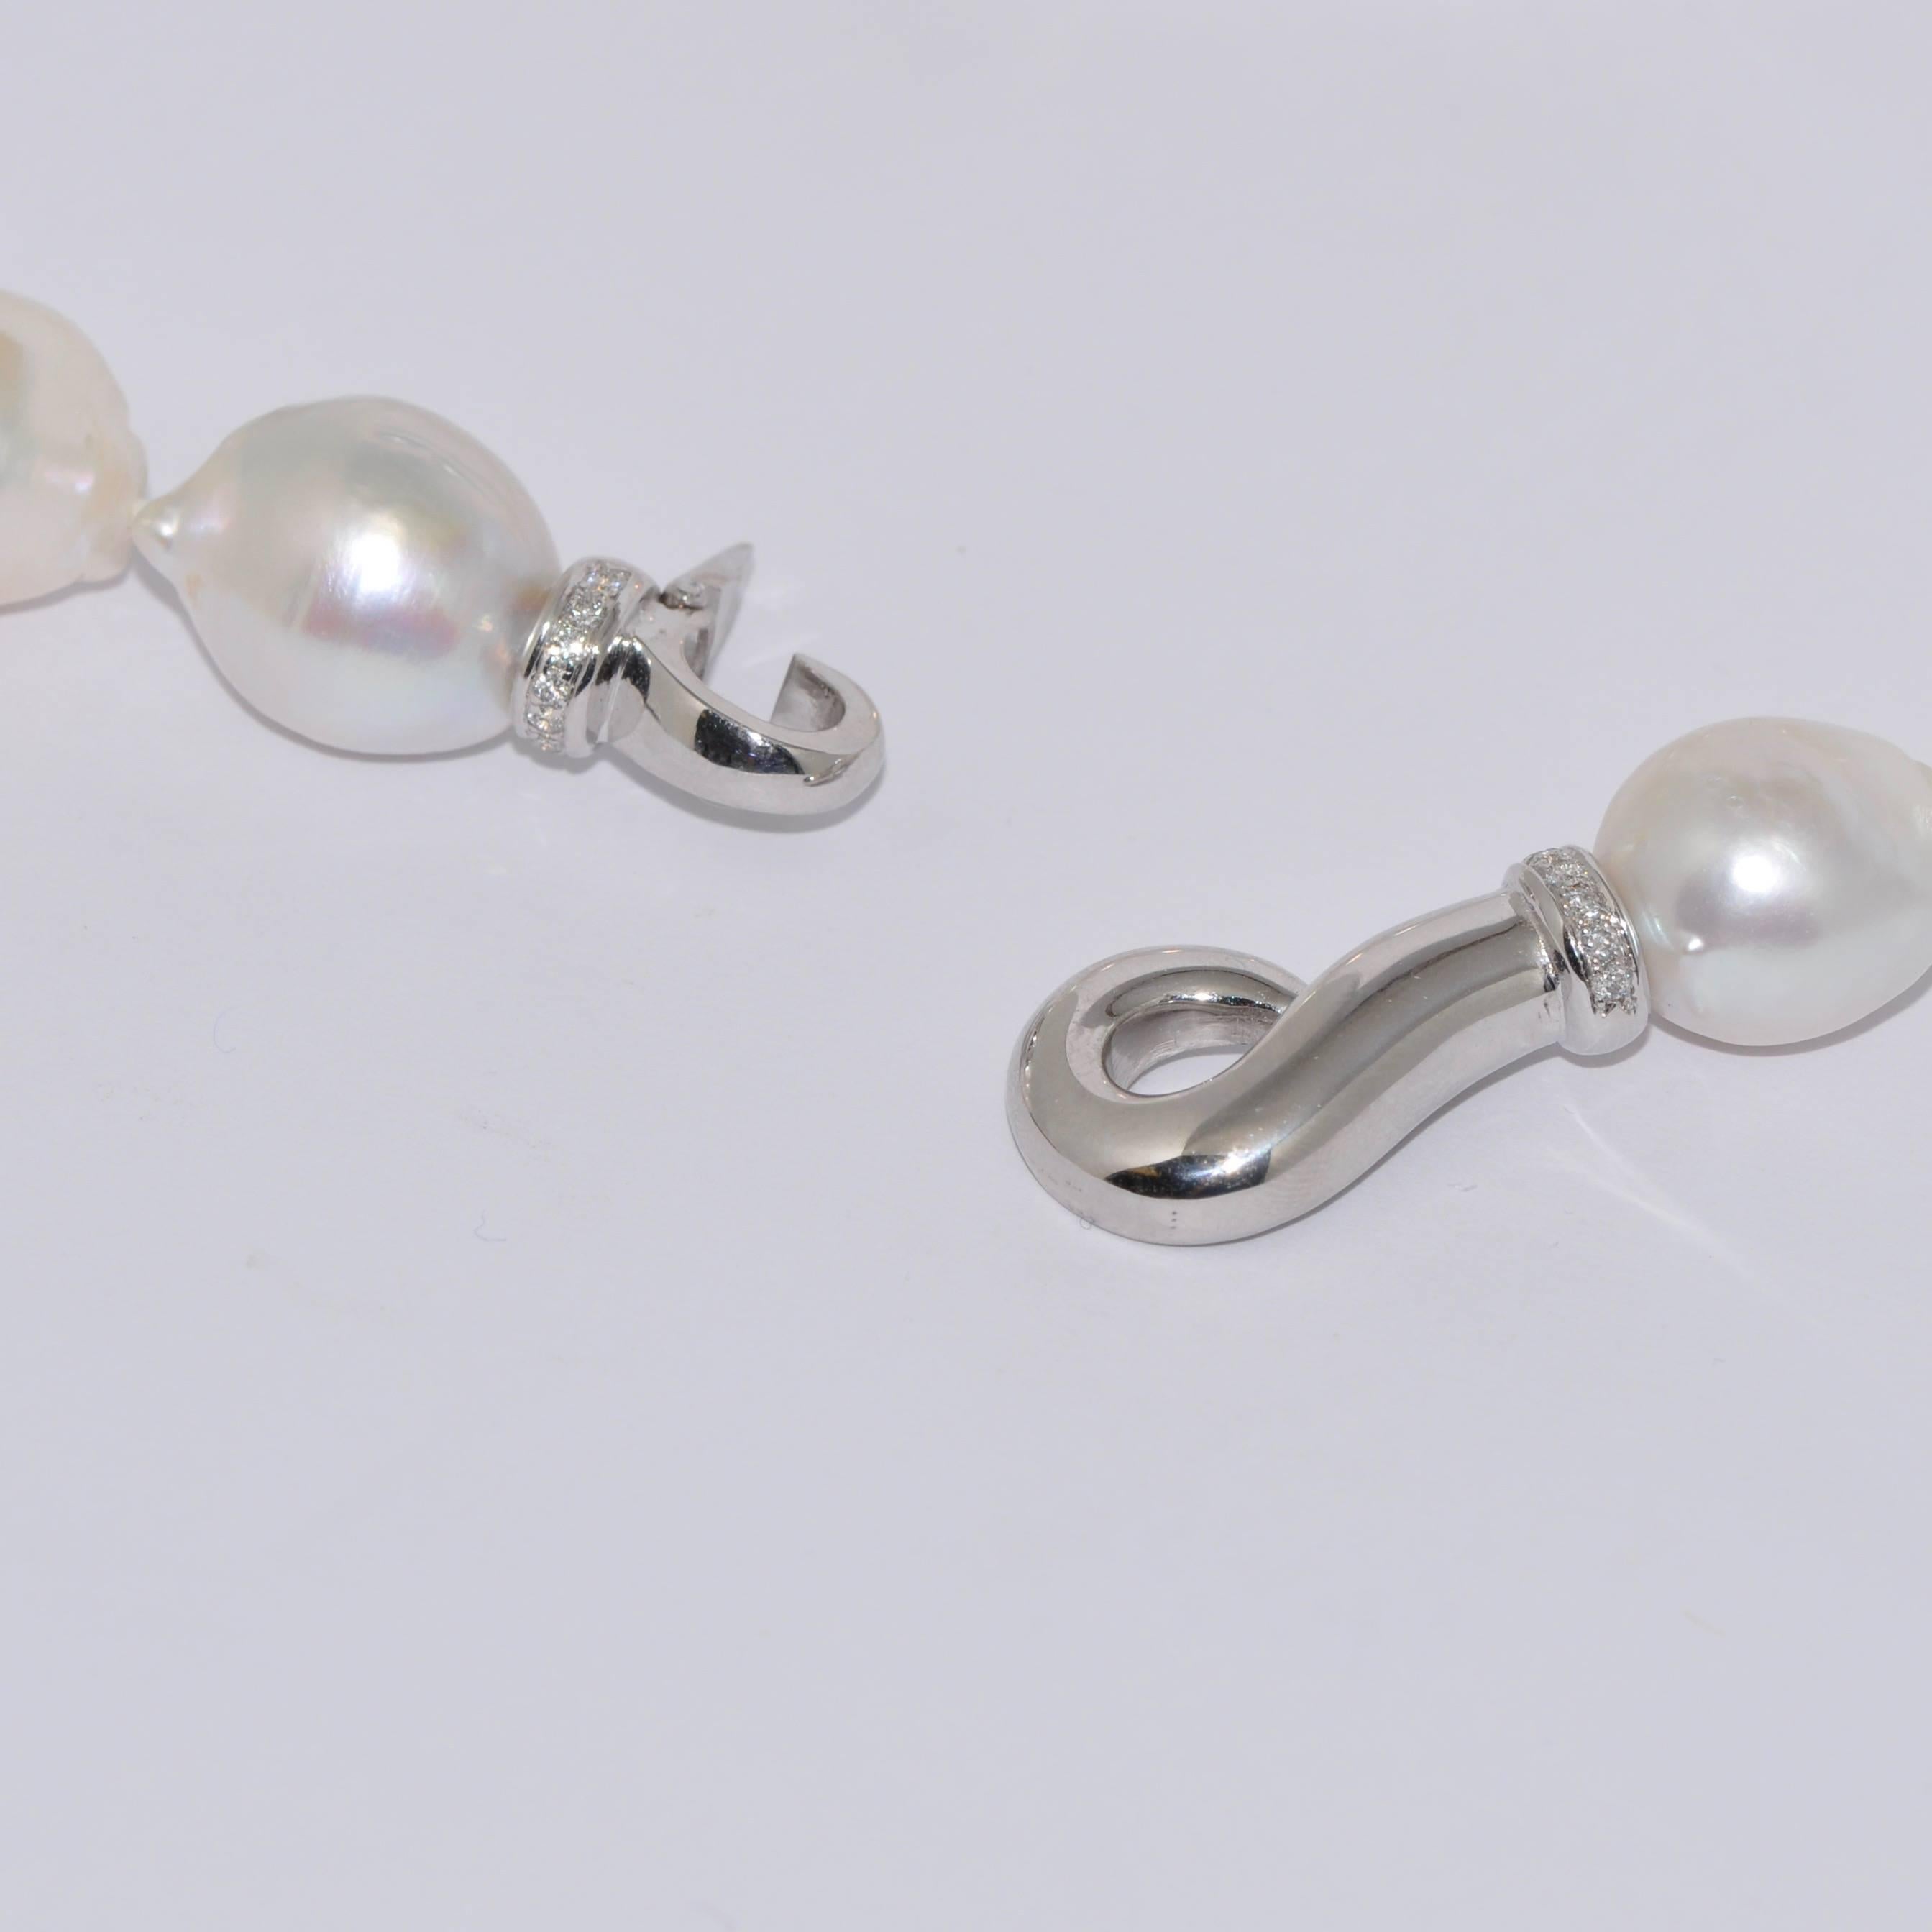 Baroque Pearls 15-16mm Diamonds and White Gold Clasp Necklace.
Baroque Pearls 15-16mm
Diamonds 0.19 Carat
White Gold 18 Carat 10.35 gr
45 cm